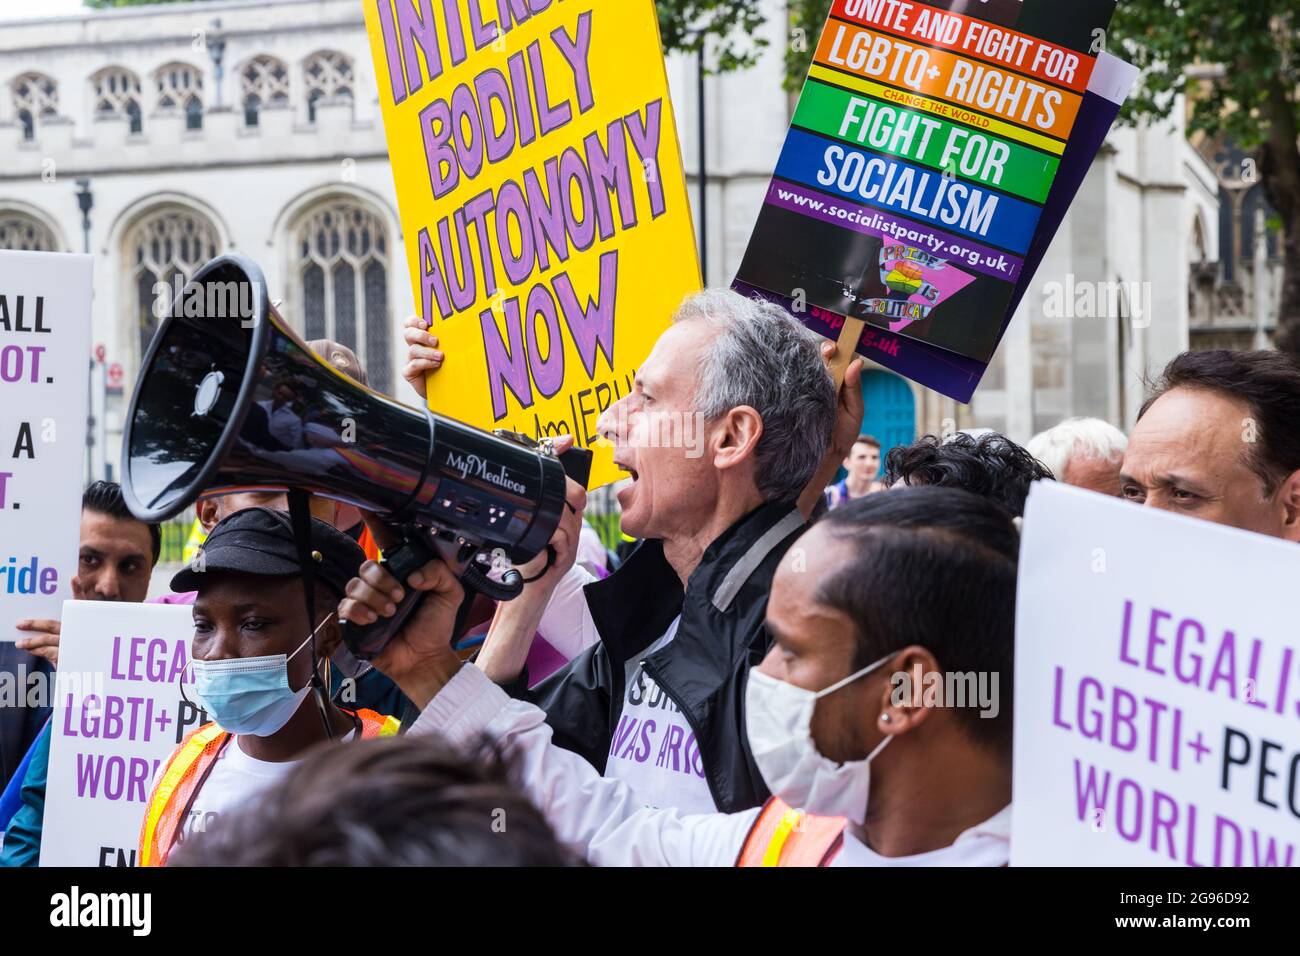 Peter Tatchell speaking at the Reclaim Pride protest, London Stock Photo